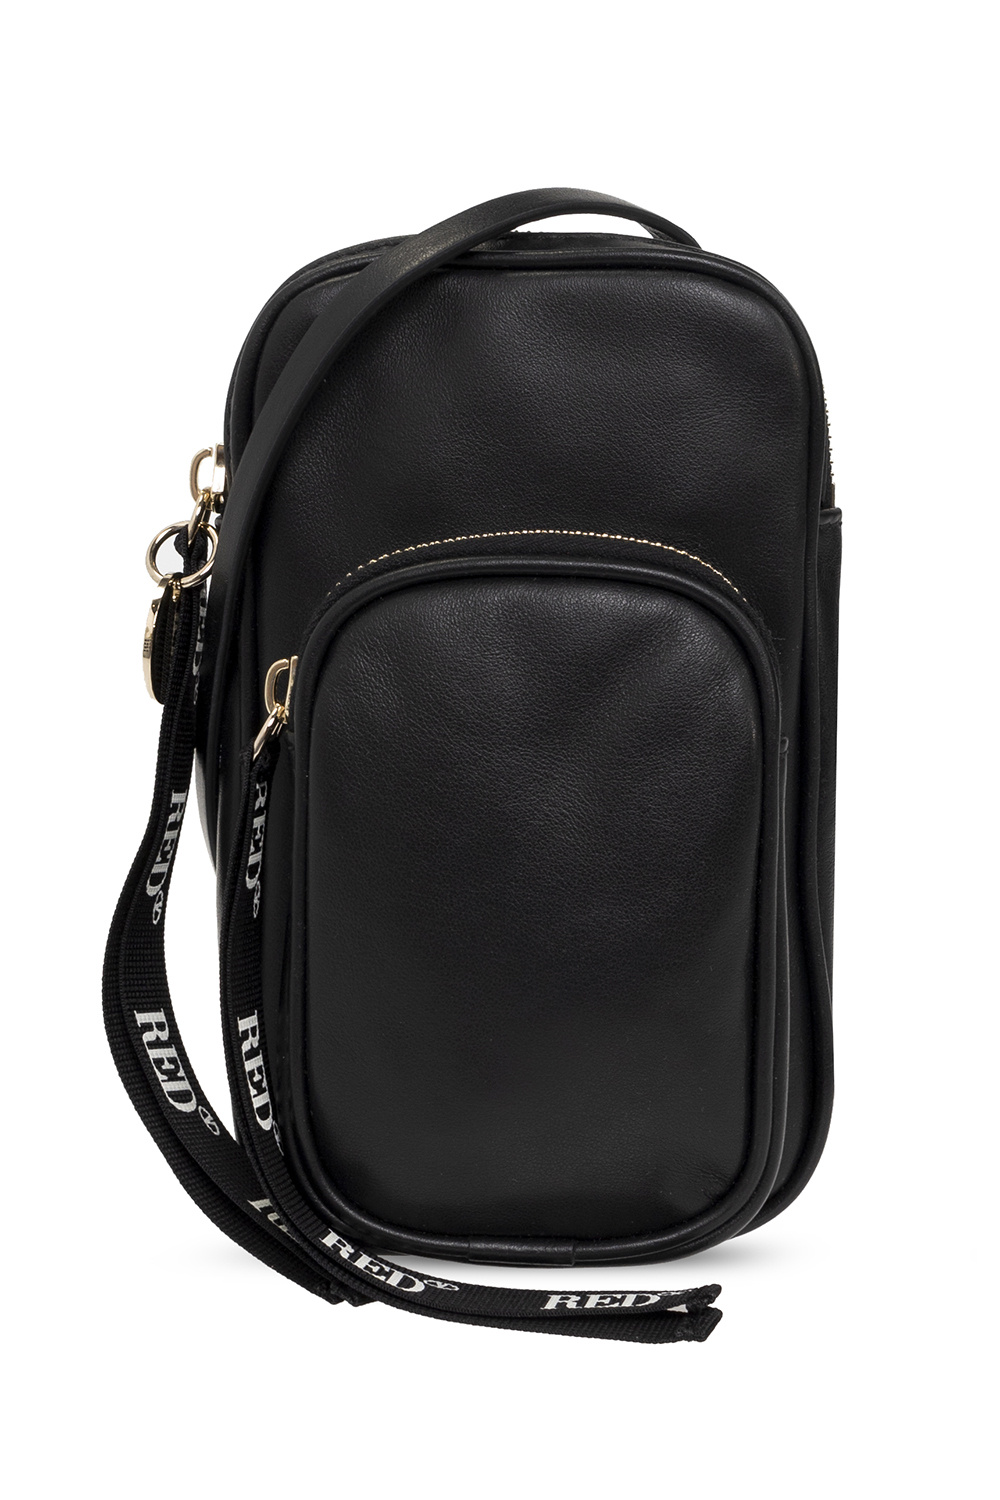 VALENTINO Special Ross Crossbody Cipria, Buy bags, purses & accessories  online